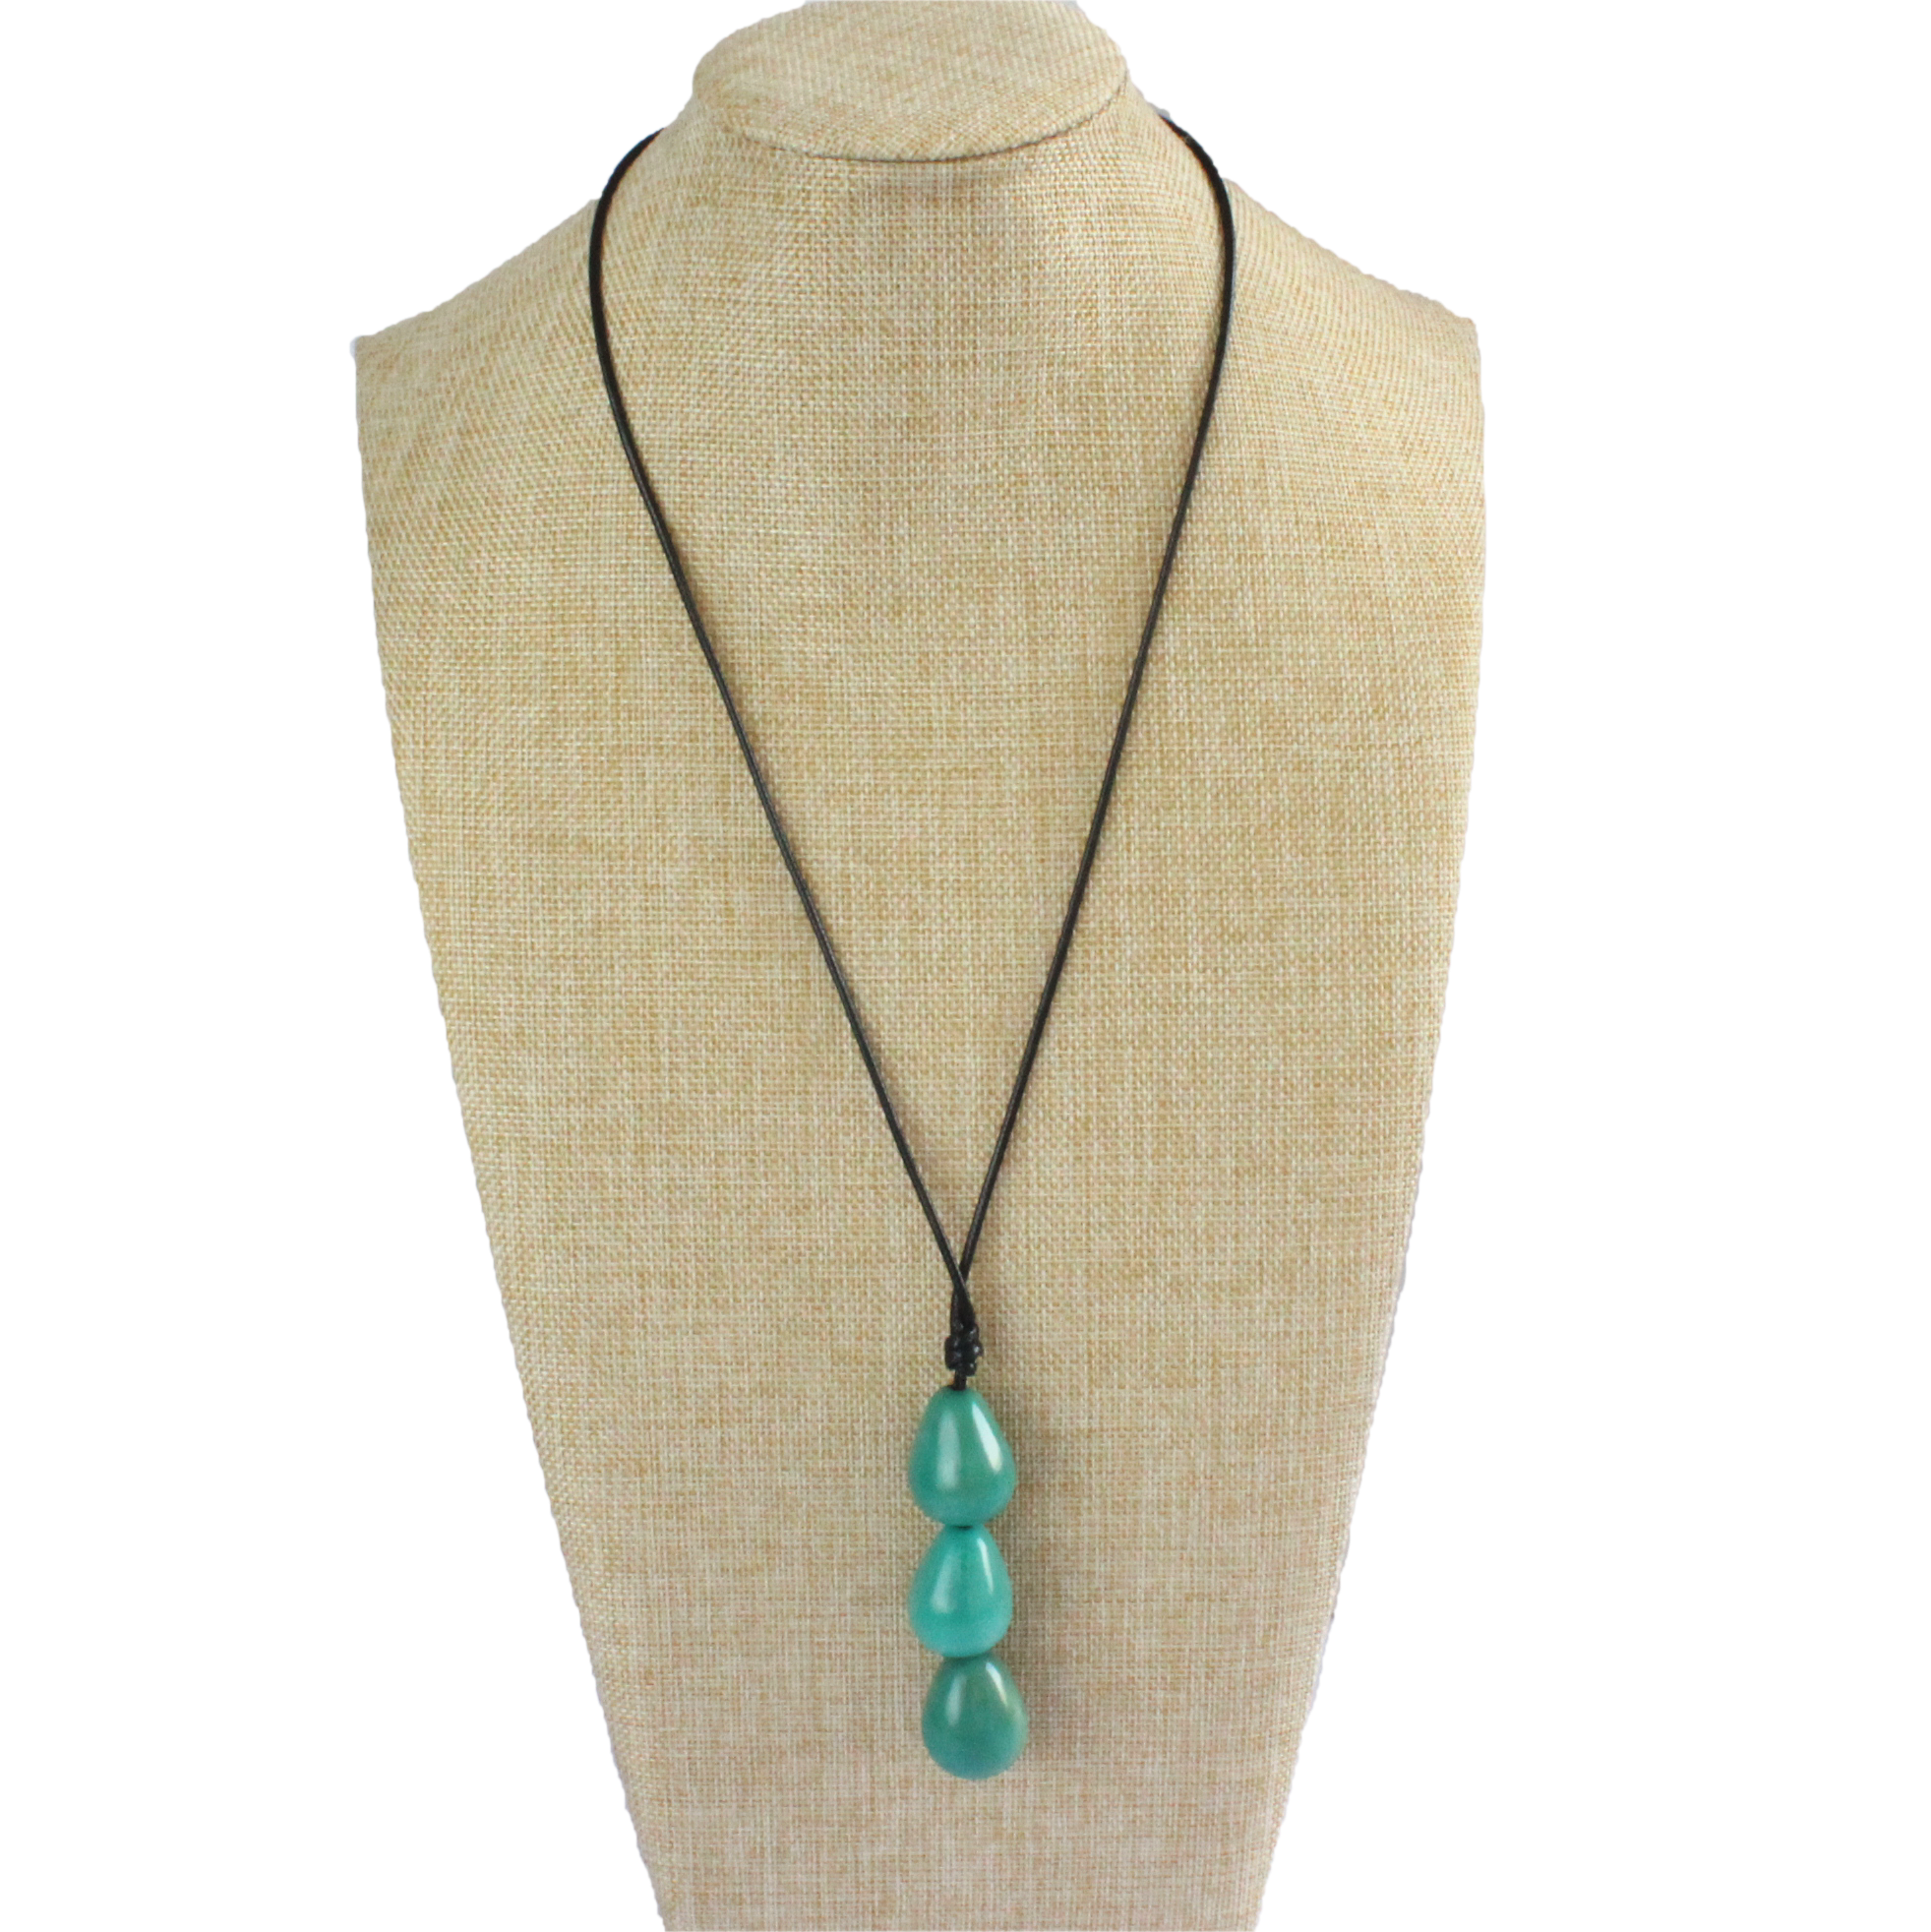 Necklace, handmade, sustainable tagua nut, turquoise, stand